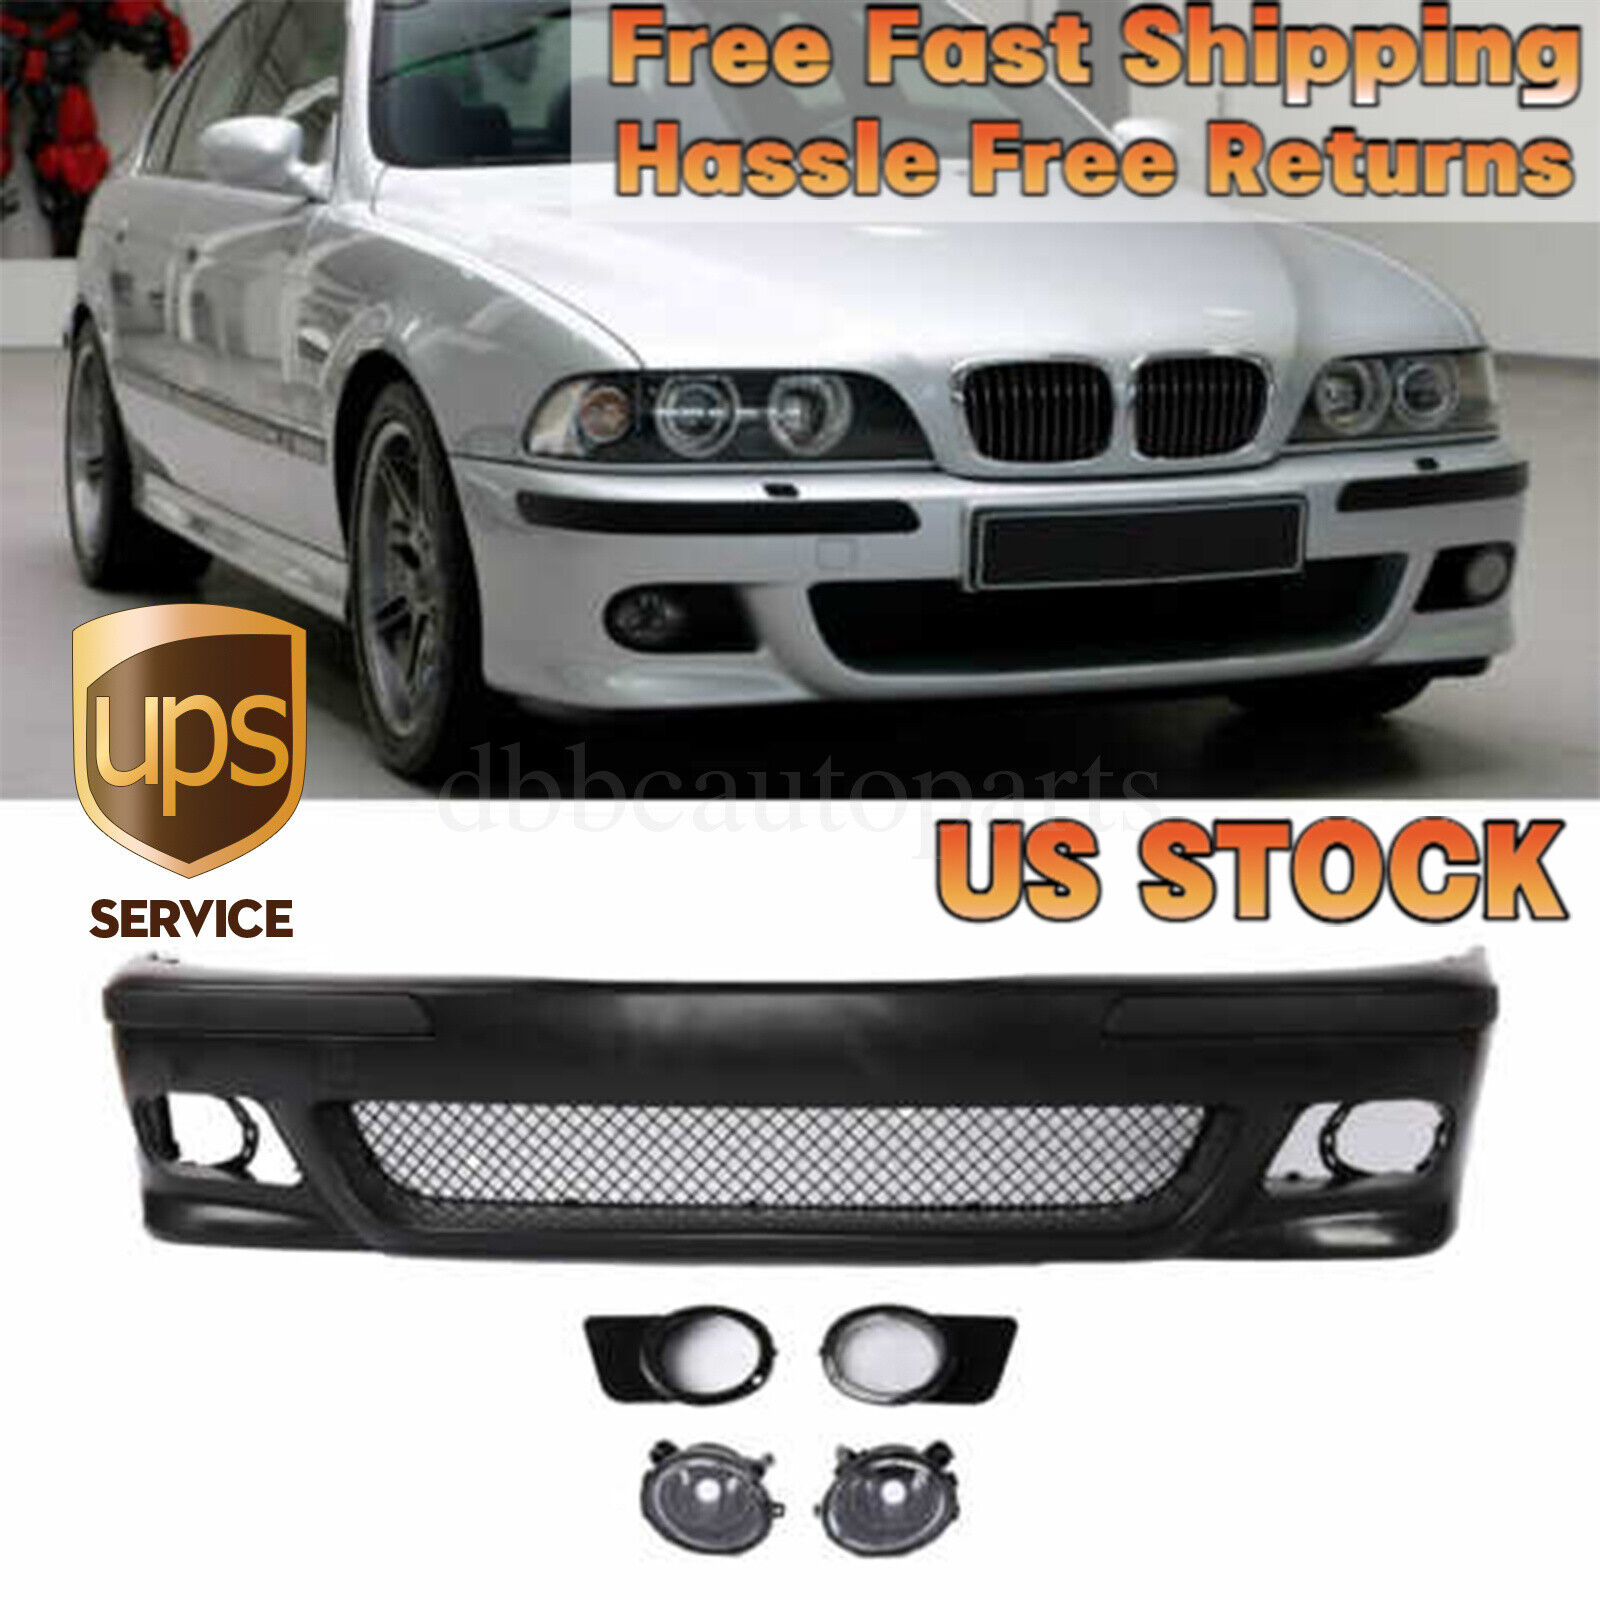 Fit for BMW E39 5SERIES M5 STYLE REPLACEMENT FRONT BUMPER COVER+FOG LIGHT 96-03